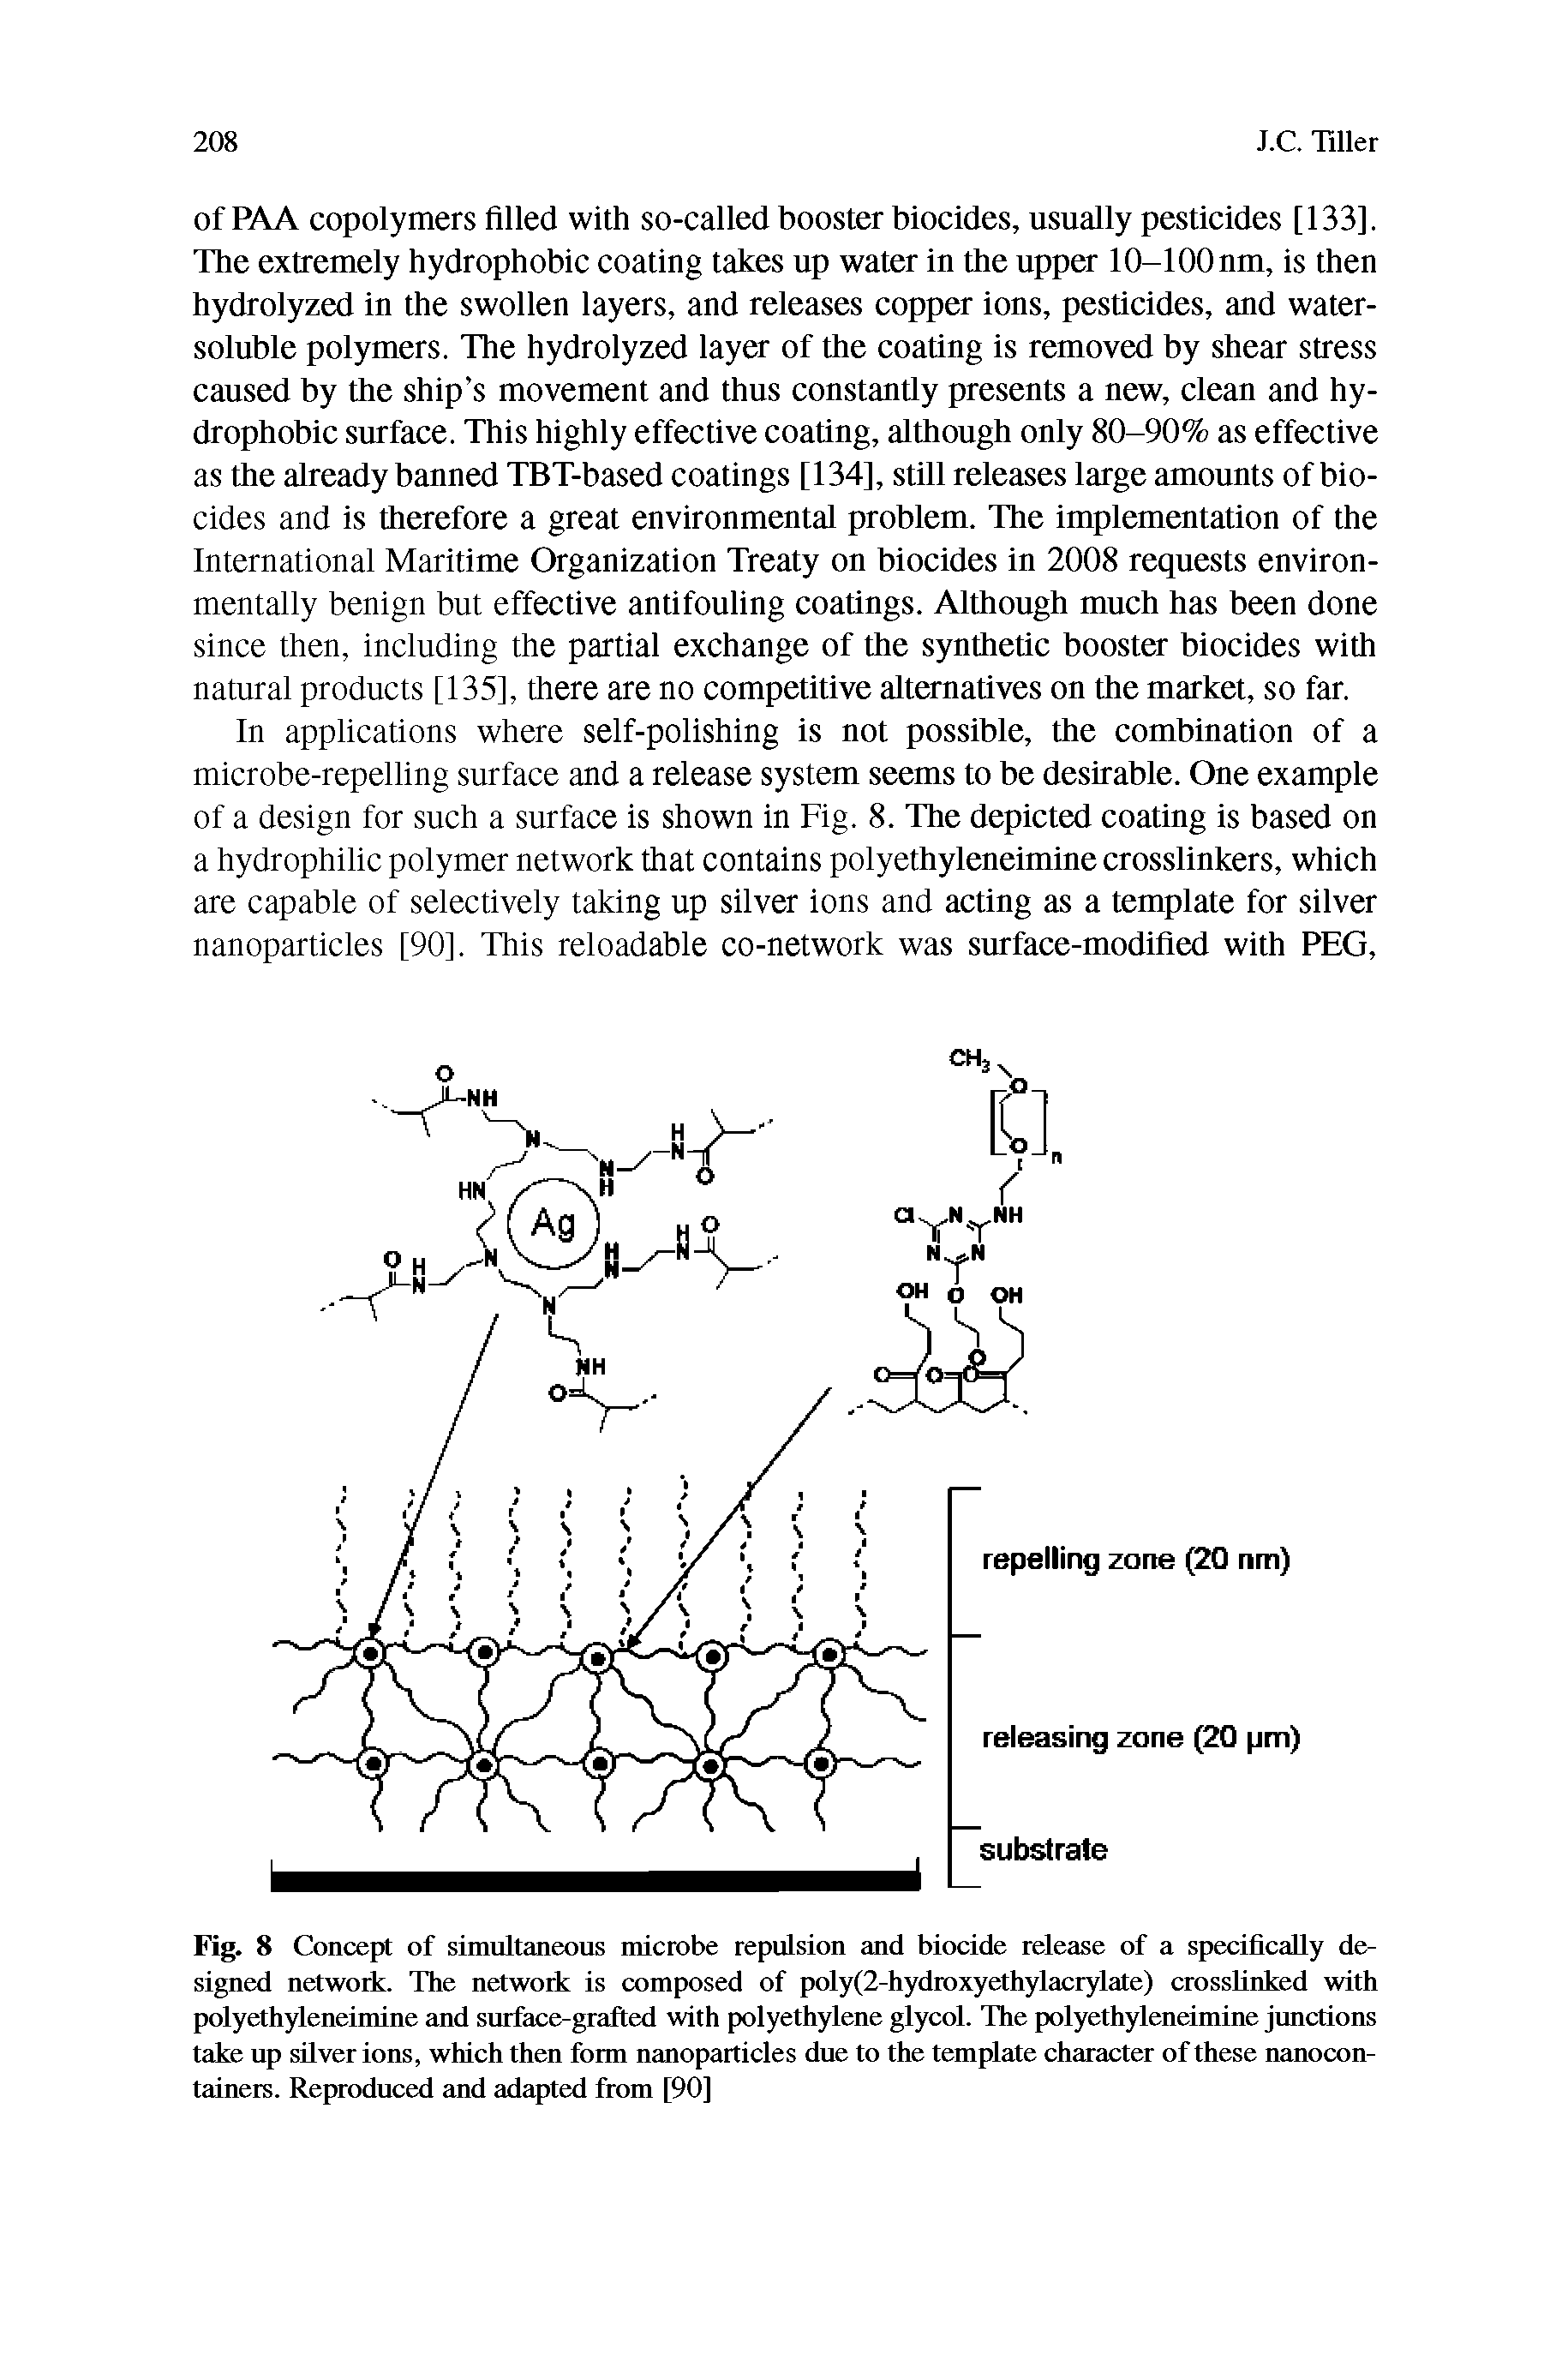 Fig. 8 Concept of simultaneous microbe repulsion and biocide release of a specifically designed network. The network is composed of poly(2-hydroxyethylacrylate) crosslinked with polyethyleneimine and surface-grafted with polyethylene glycol. The polyethyleneimine junctions take up silver ions, which then form nanoparticles due to the template character of these nanocontainers. Reproduced and adapted from [90]...